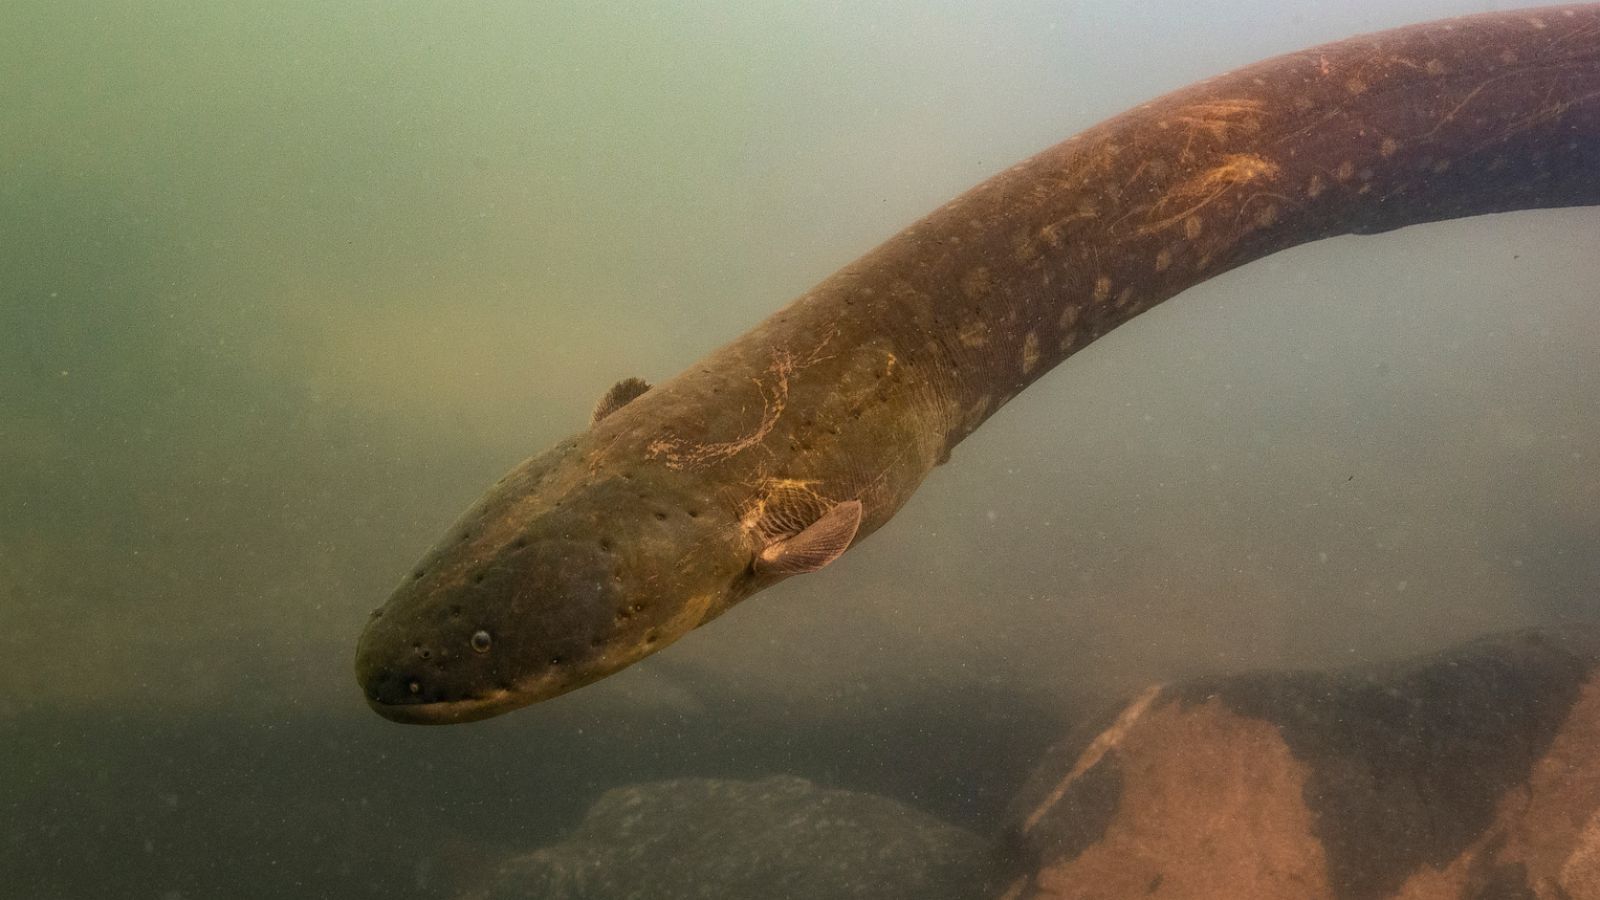 Jolting discovery: Powerful new electric eel found